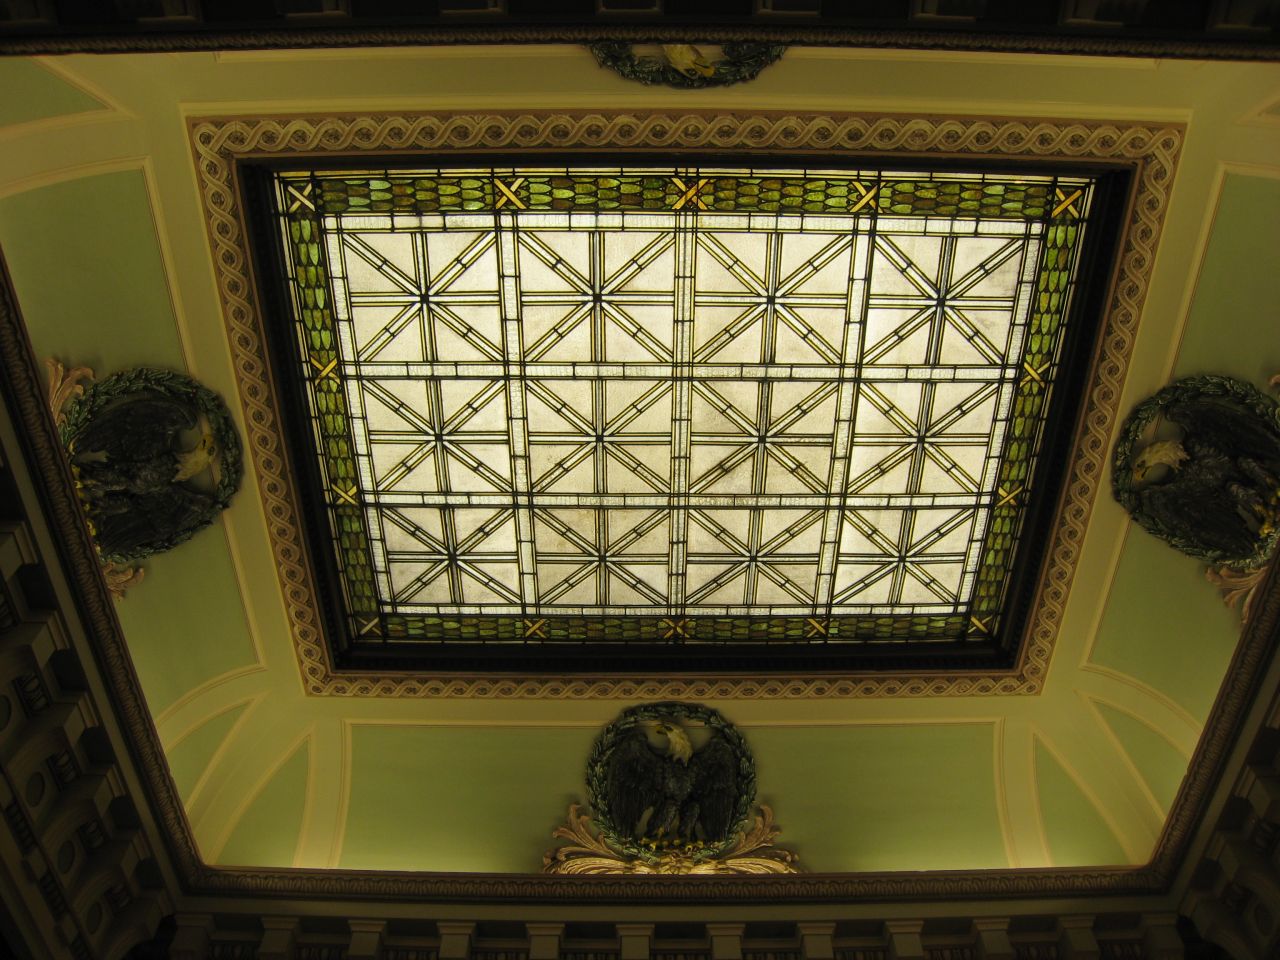 Ceiling above the main staircase